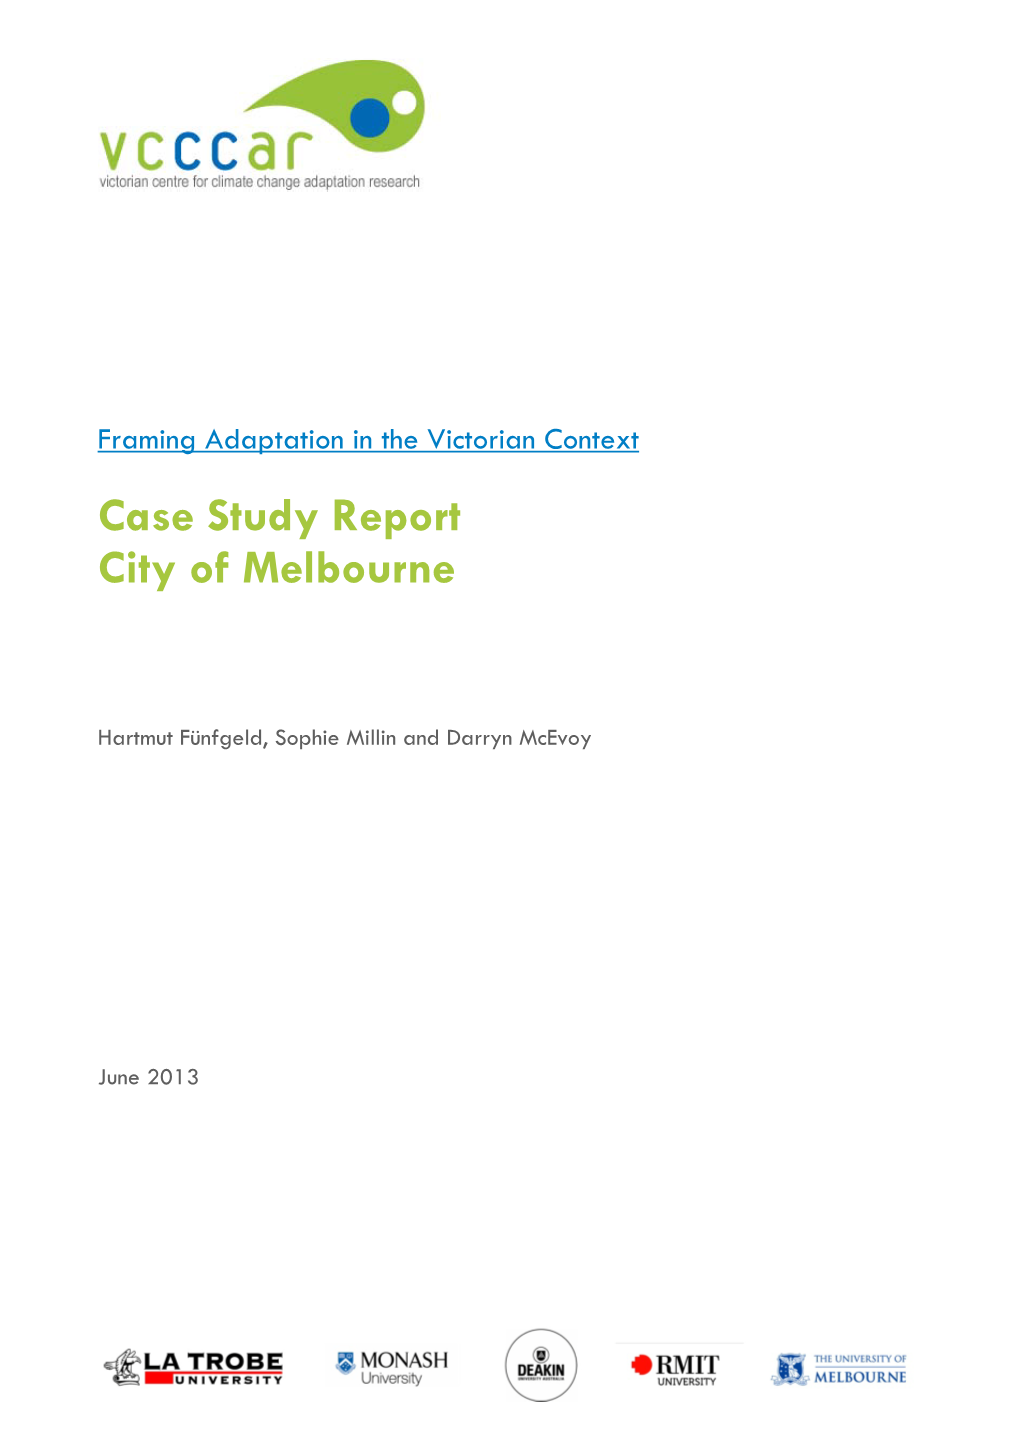 Case Study Report City of Melbourne